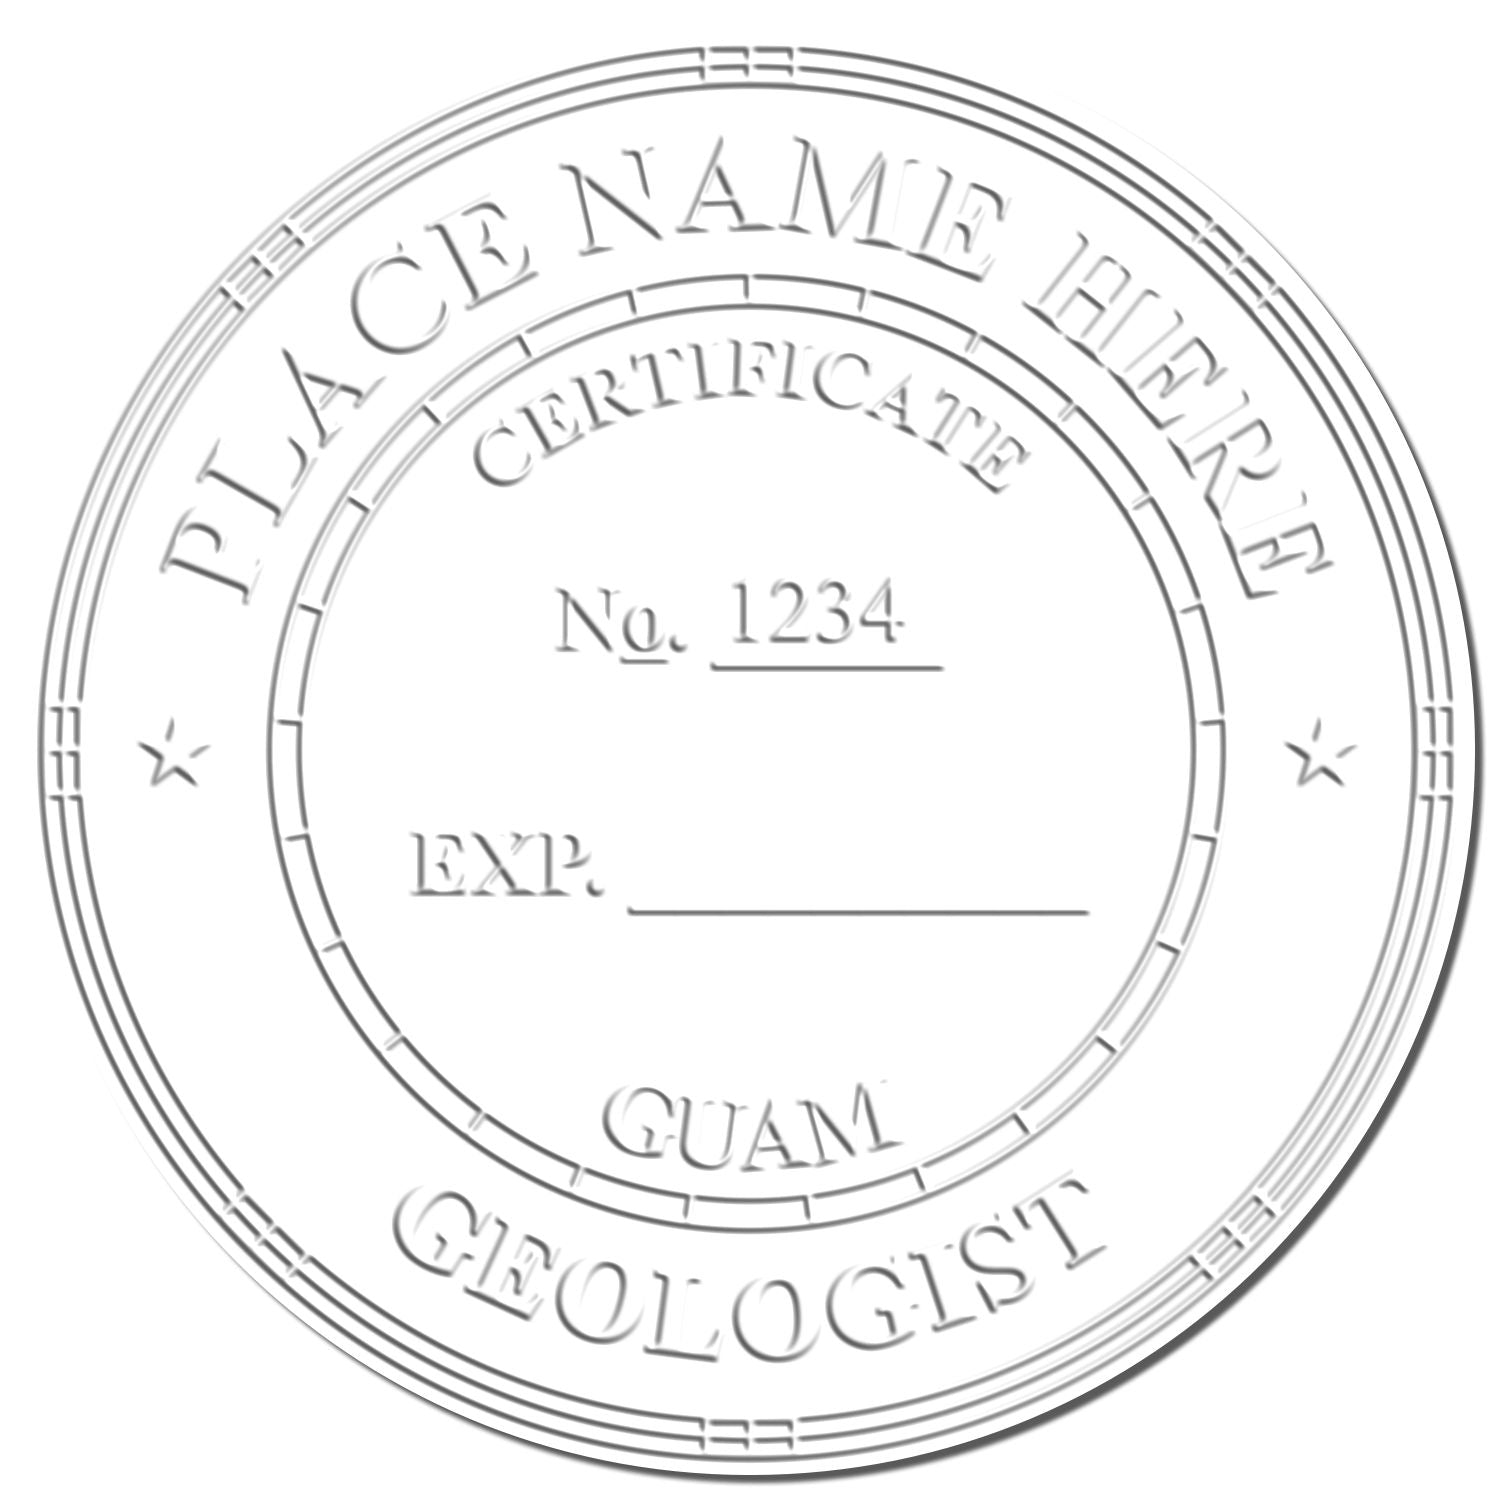 The main image for the Guam Geologist Desk Seal depicting a sample of the imprint and imprint sample